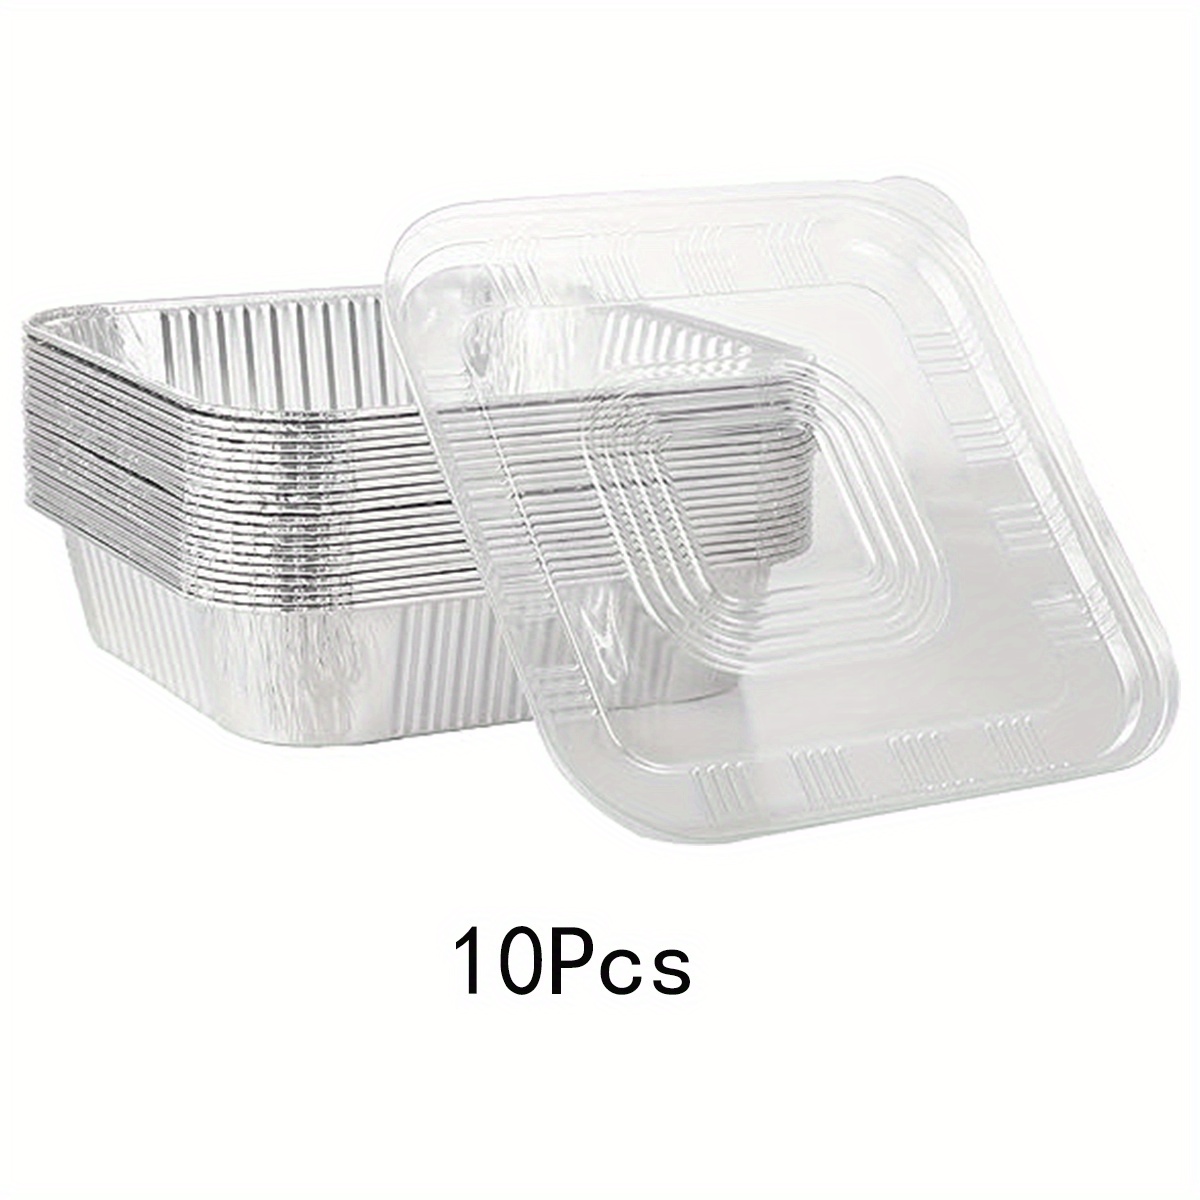 WANBAO 30 Pcs Disposable Aluminum Tin Foil Baking Pans Bakeware Square 8''  X 8'' X 2'' Inch Meal Prep for Catering, Baking Cakes, Breads, Brownies